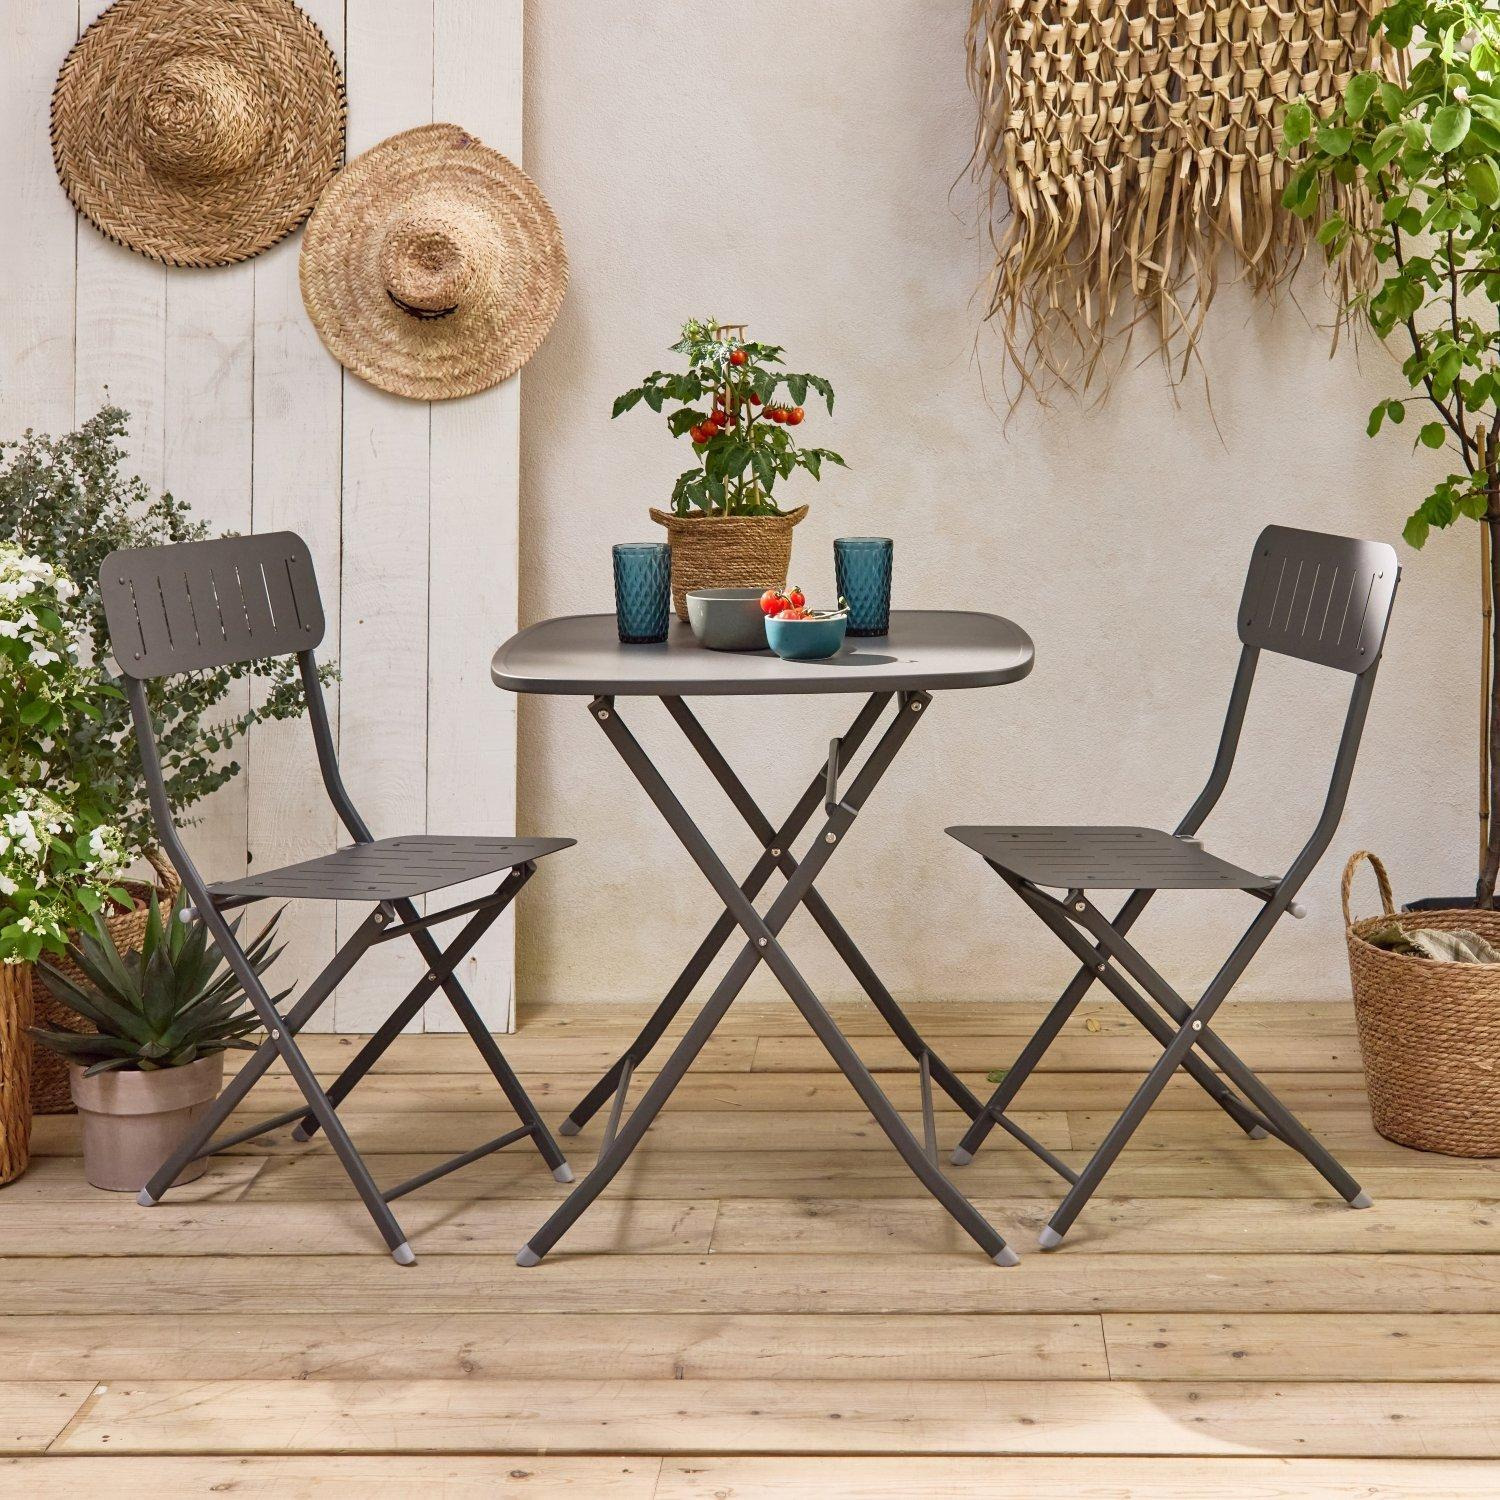 2-seater Bistro Garden Table With Chairs - image 1